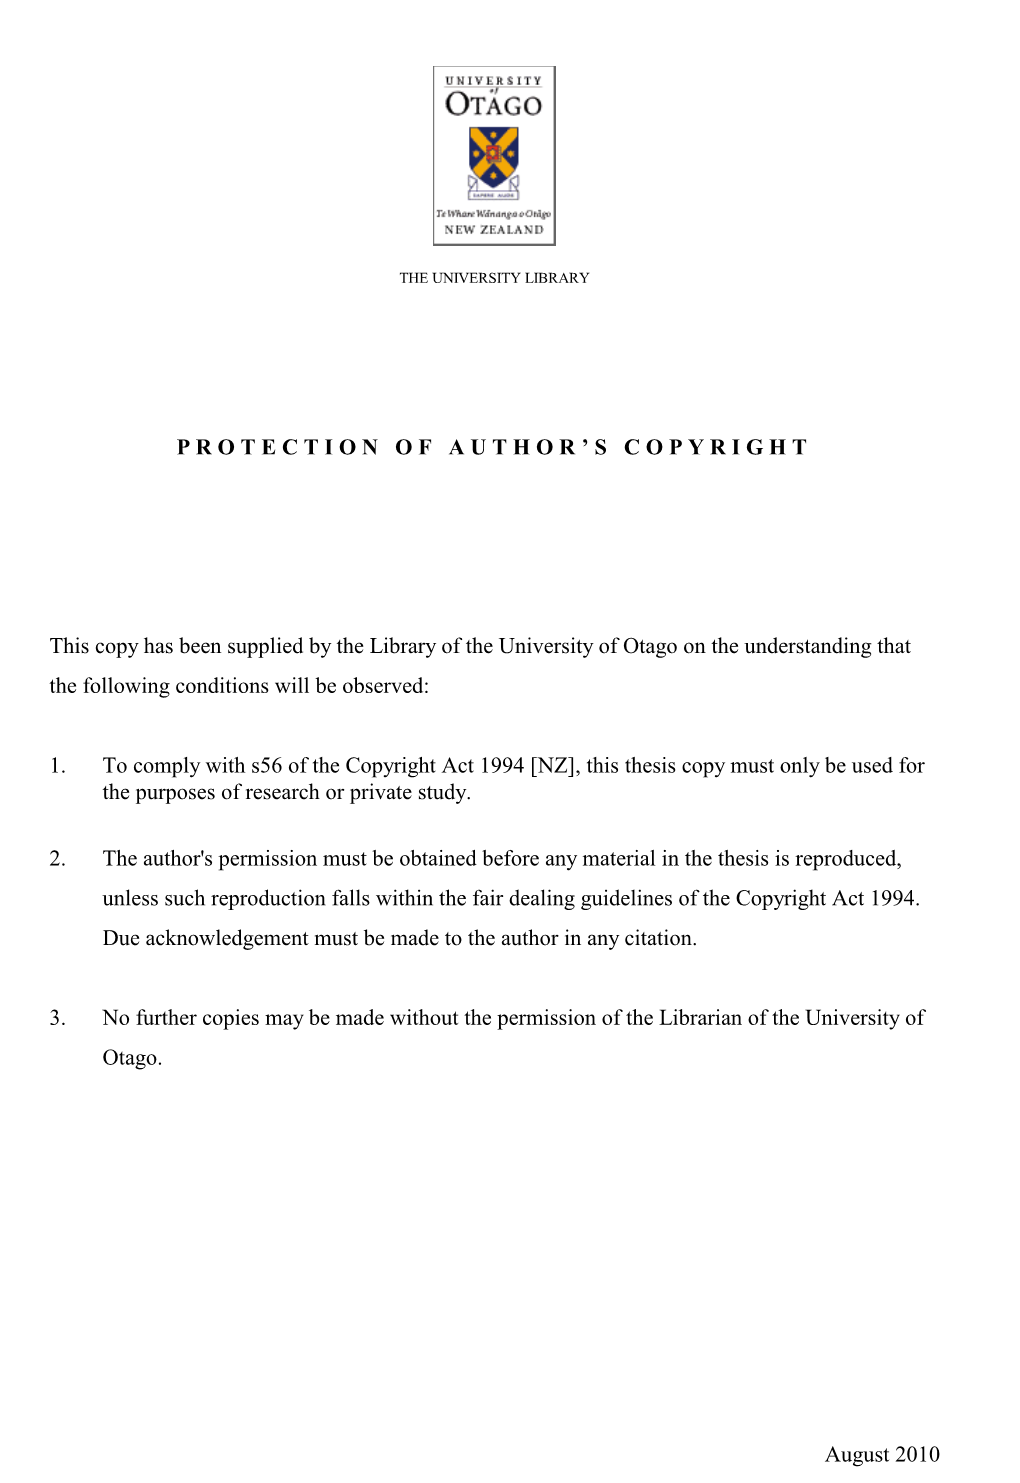 SCOPYRIGHT This Copy Has Been Supplied by the Library of the University of Otago O